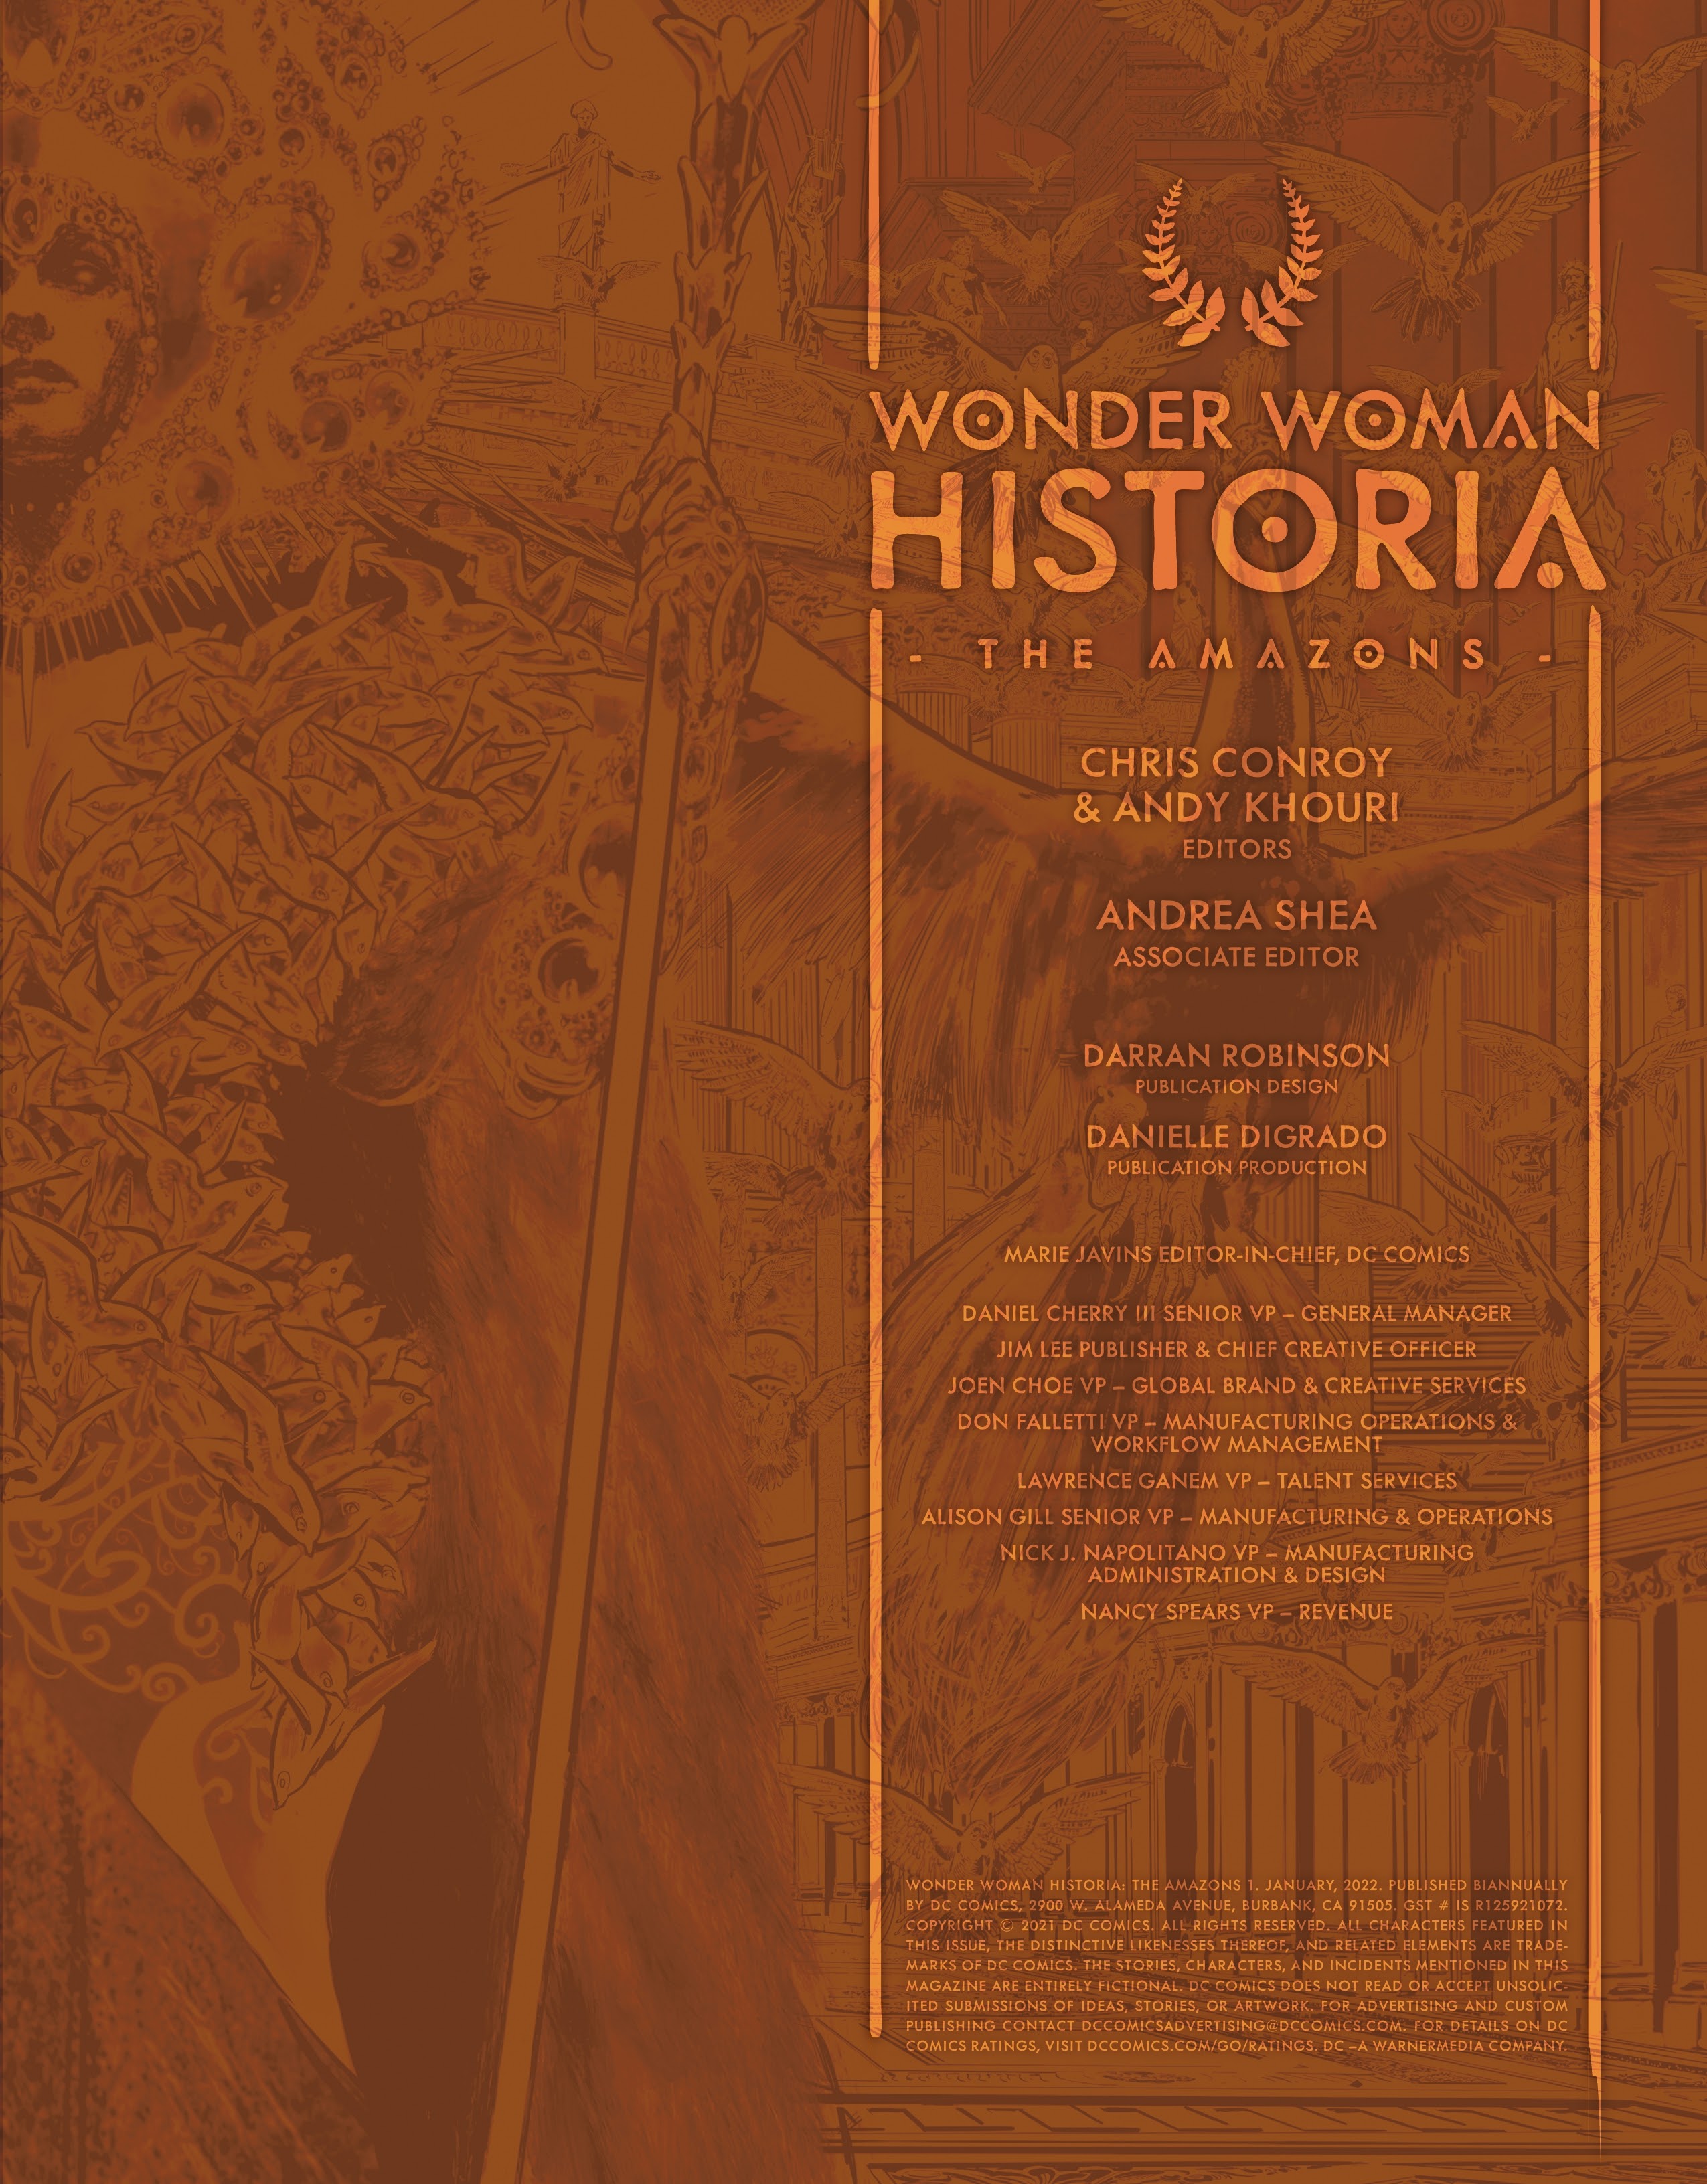 Read online Wonder Woman Historia: The Amazons comic -  Issue #1 - 53